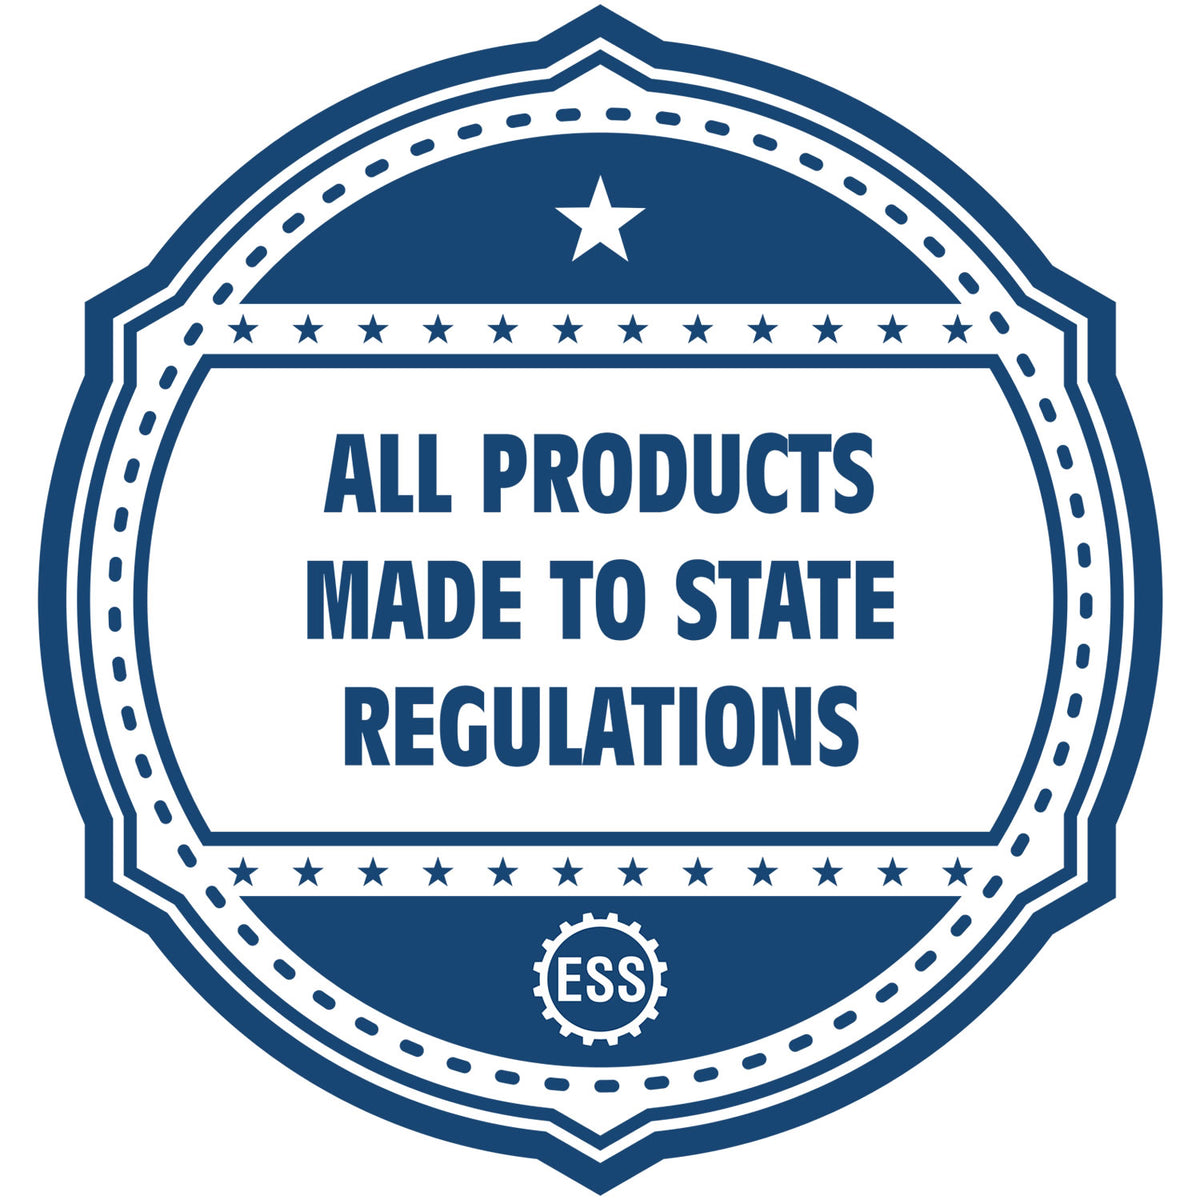 An icon or badge element for the Premium MaxLight Pre-Inked Kentucky Engineering Stamp showing that this product is made in compliance with state regulations.